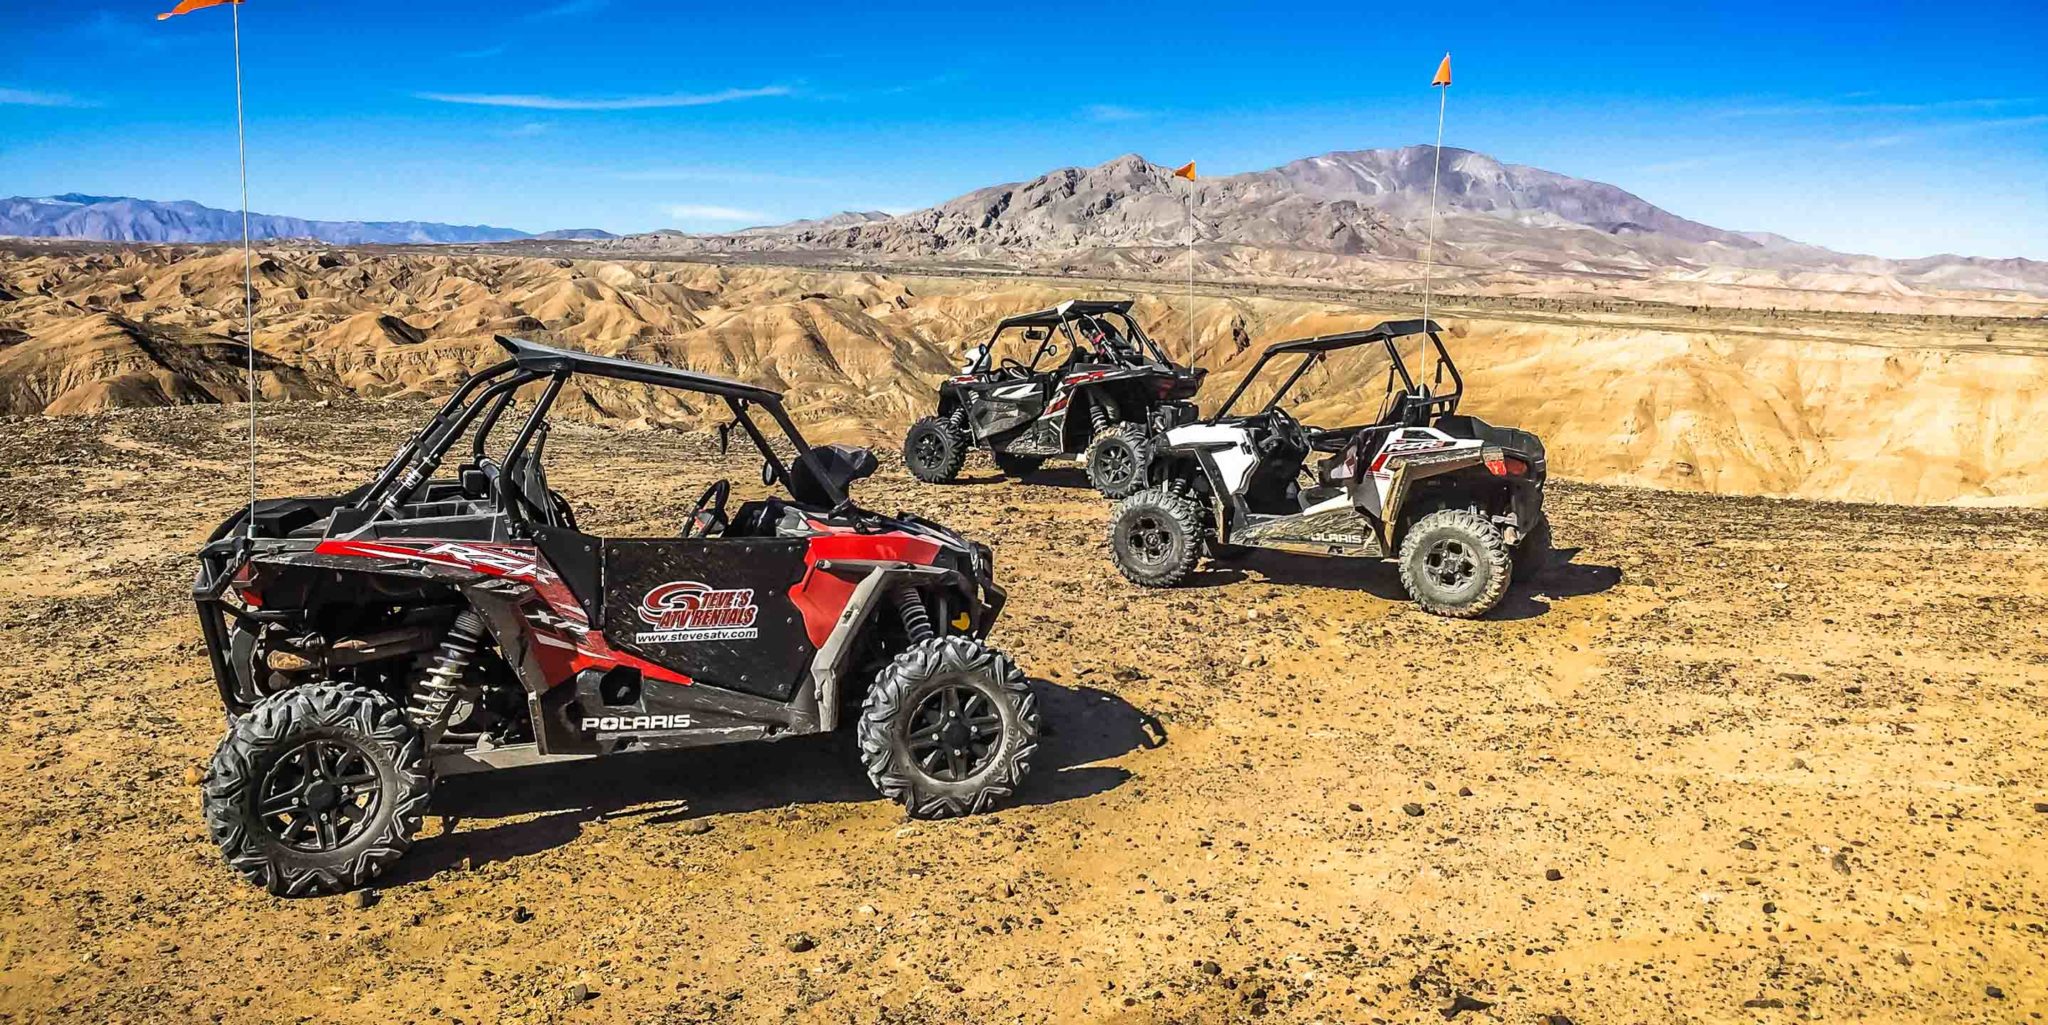 Experience the Ultimate Off-Road Adventure in the Palm Springs Area